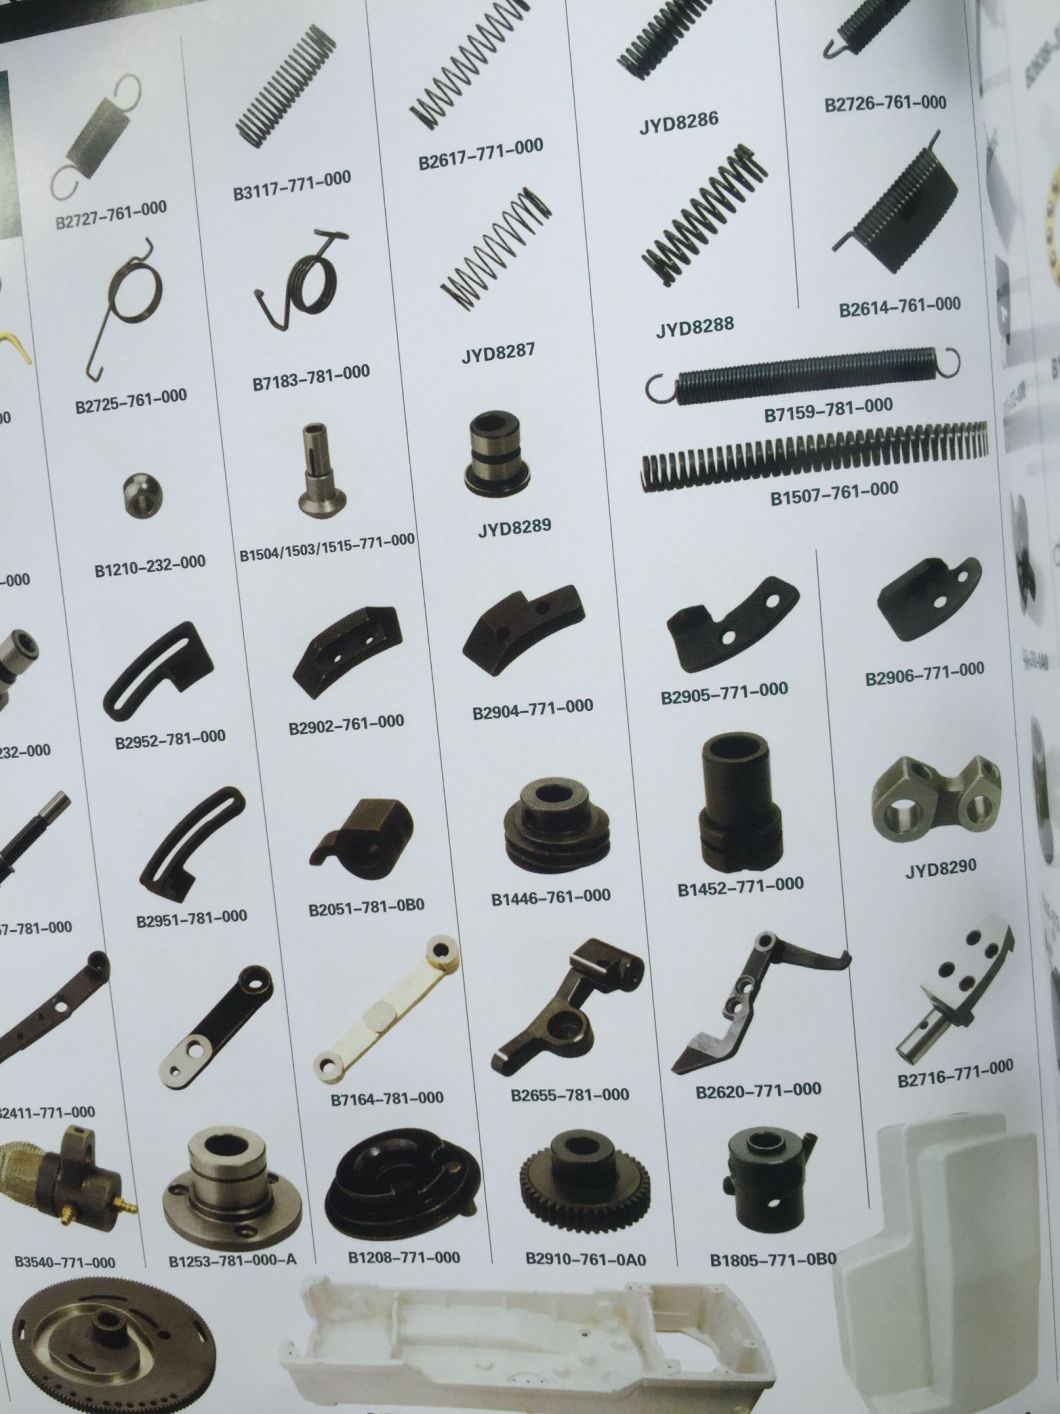 Expert Supplier of Sewing Machine Parts (LBH-761, 771, 781)